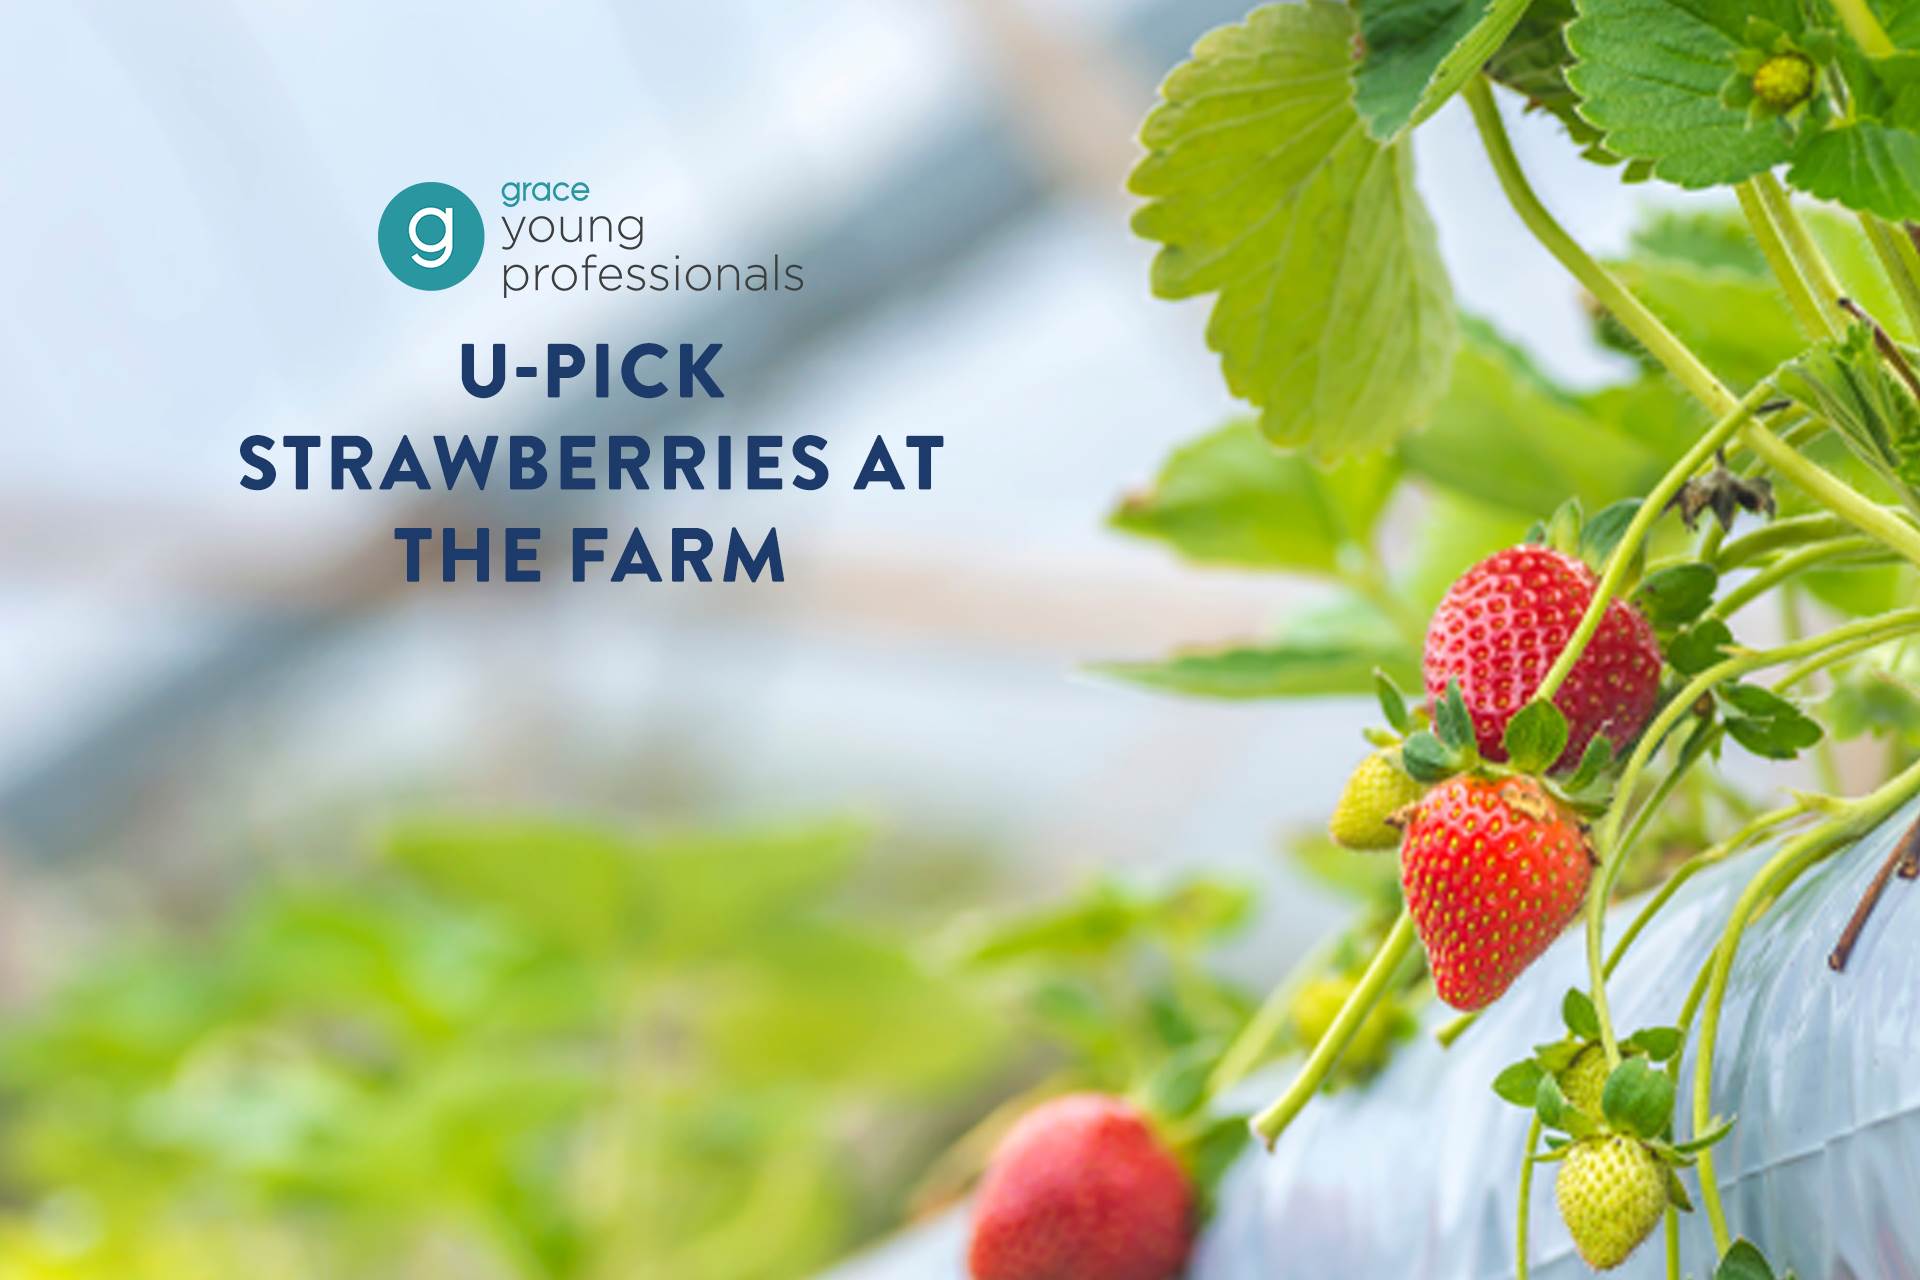 Link to U-Pick Strawberries at the Farm detail page